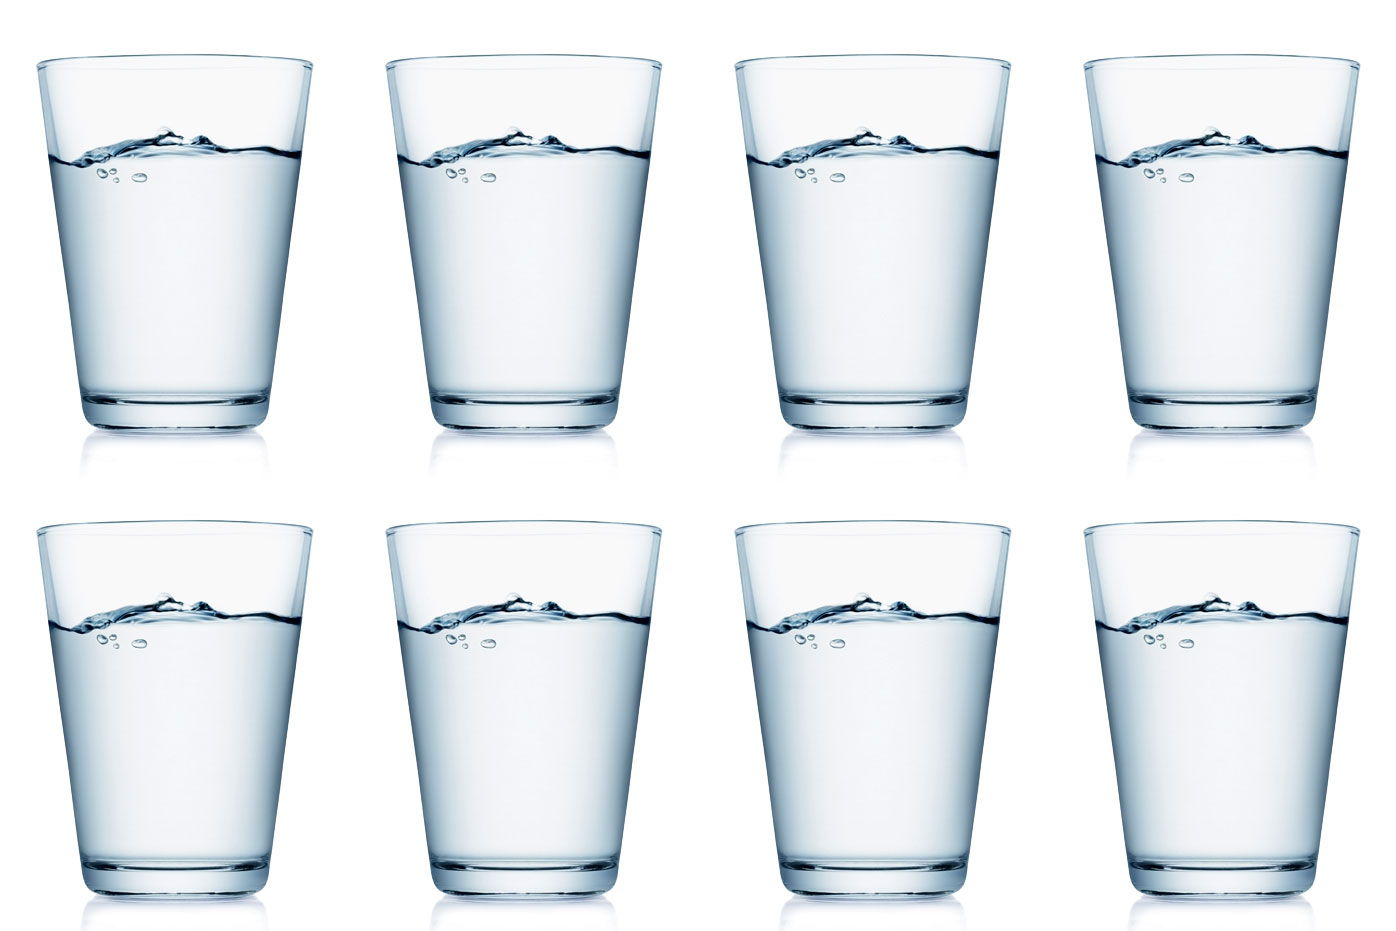 fake popular facts - drink water 8 glasses a day